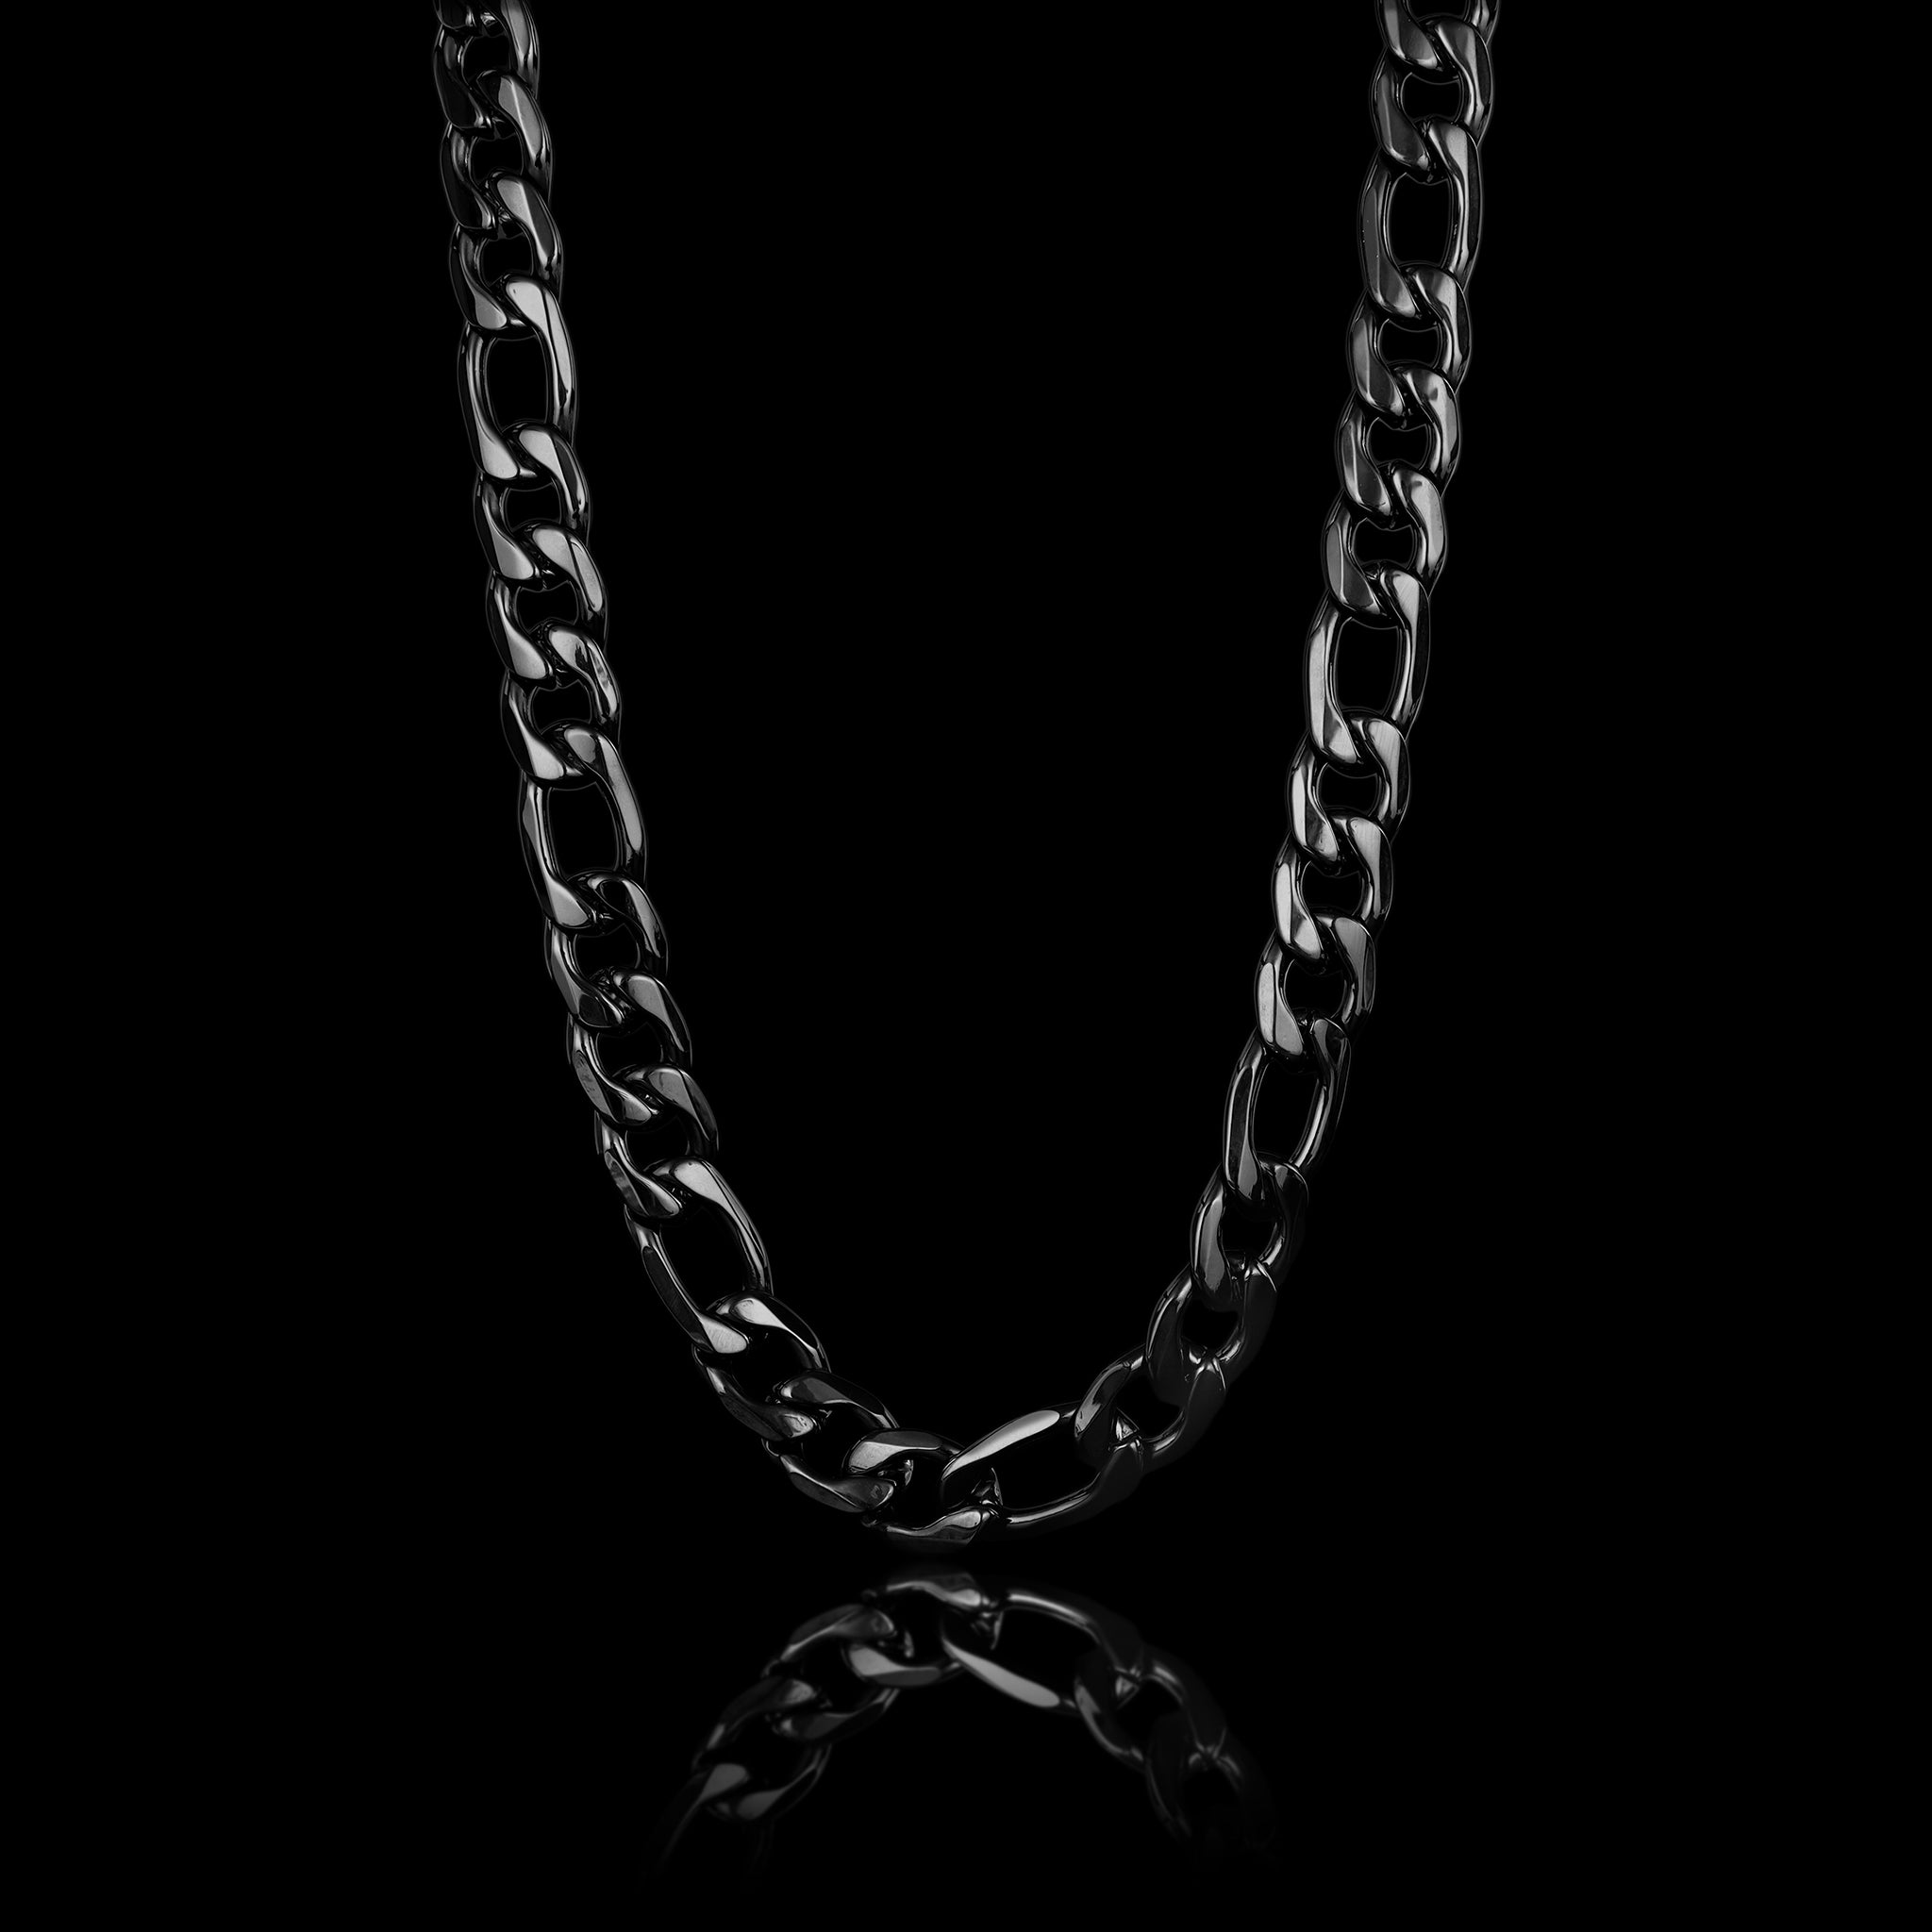 Necklaces Black Stainless Steel Figaro Chain Necklace Chn9900 Wholesale Jewelry Website Unisex